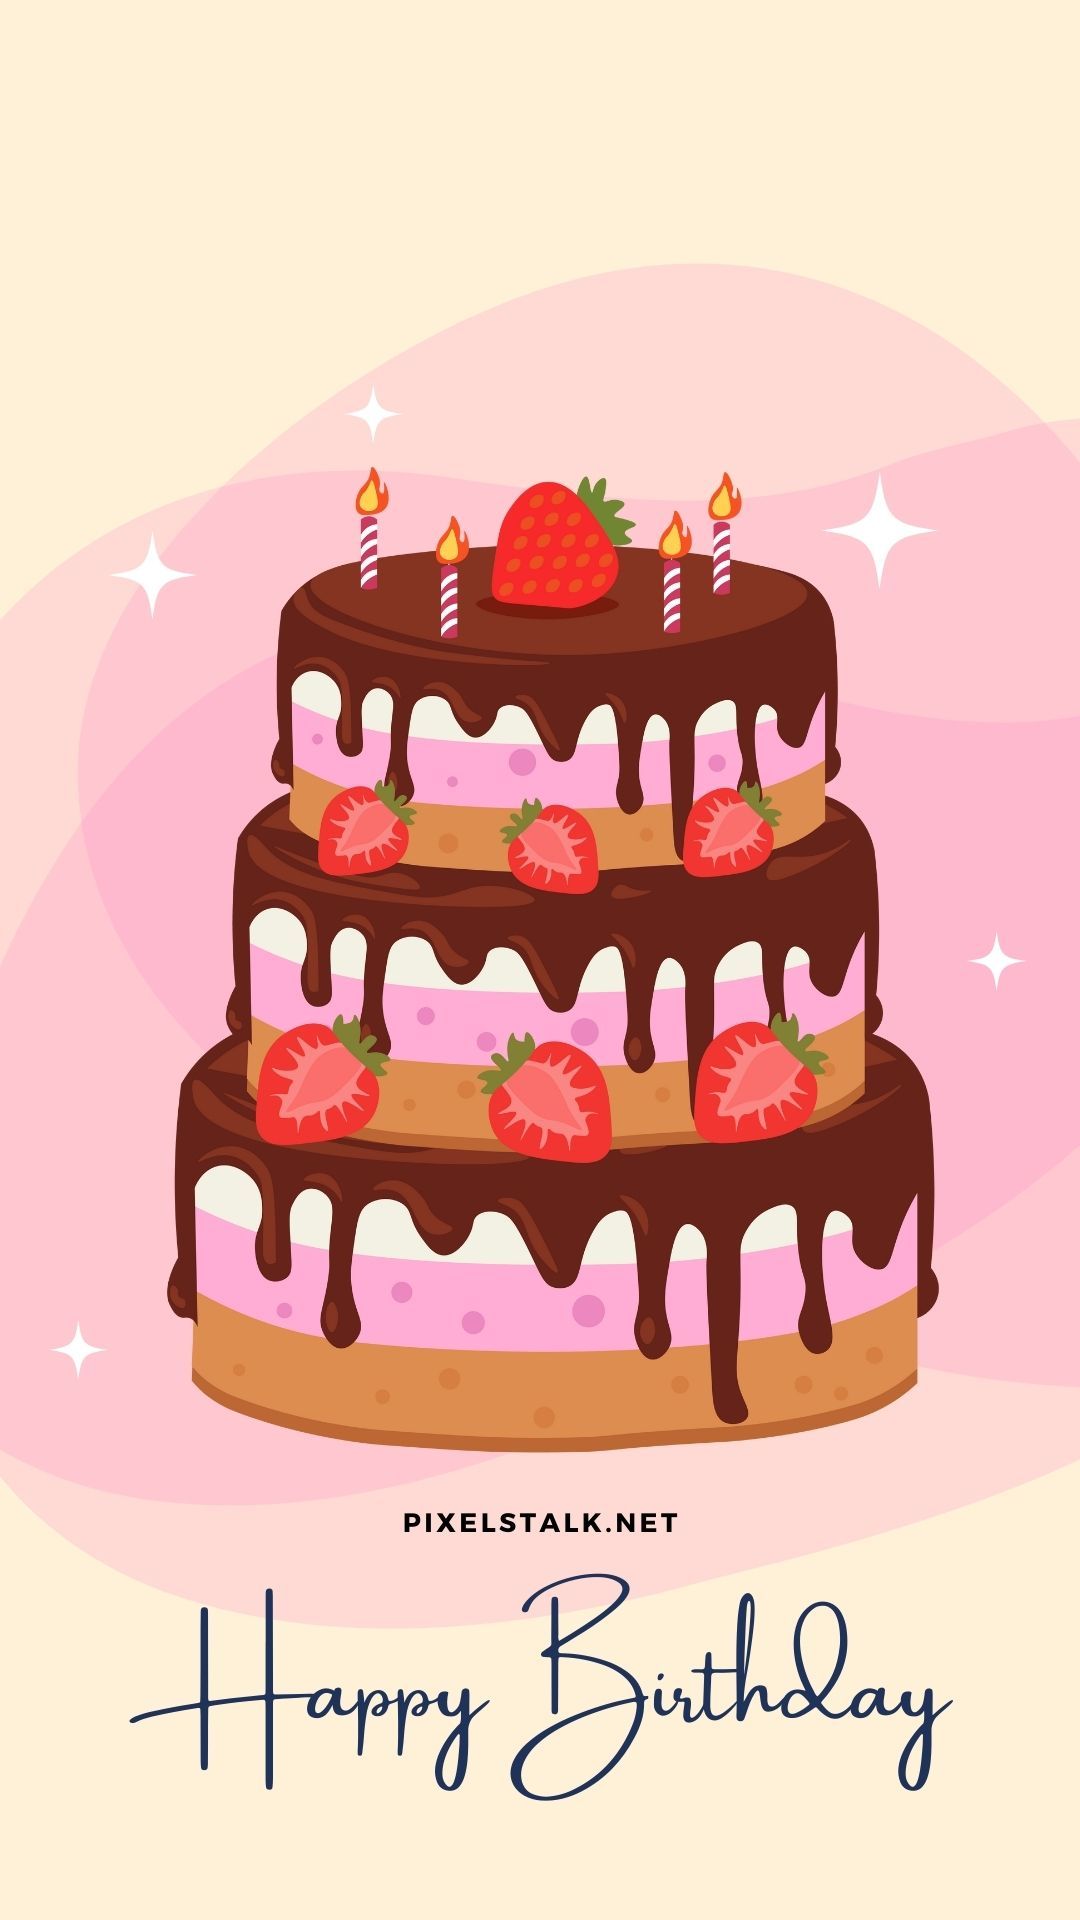 A birthday cake with strawberries and candles - Cake, birthday